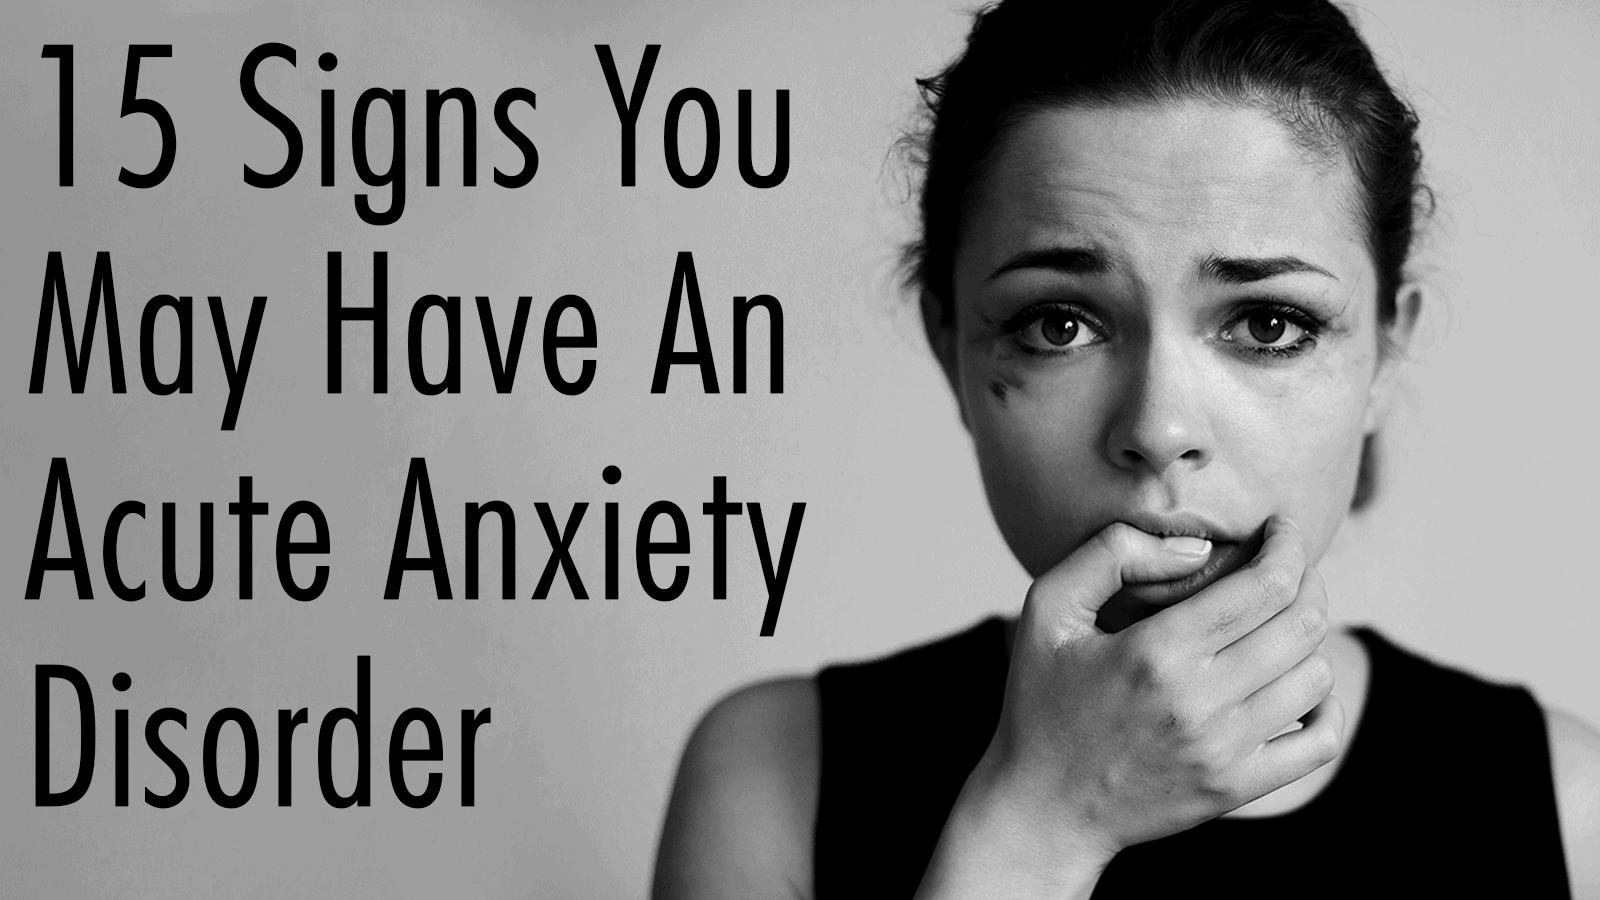 15 Signs You May Have An Acute Anxiety Disorder